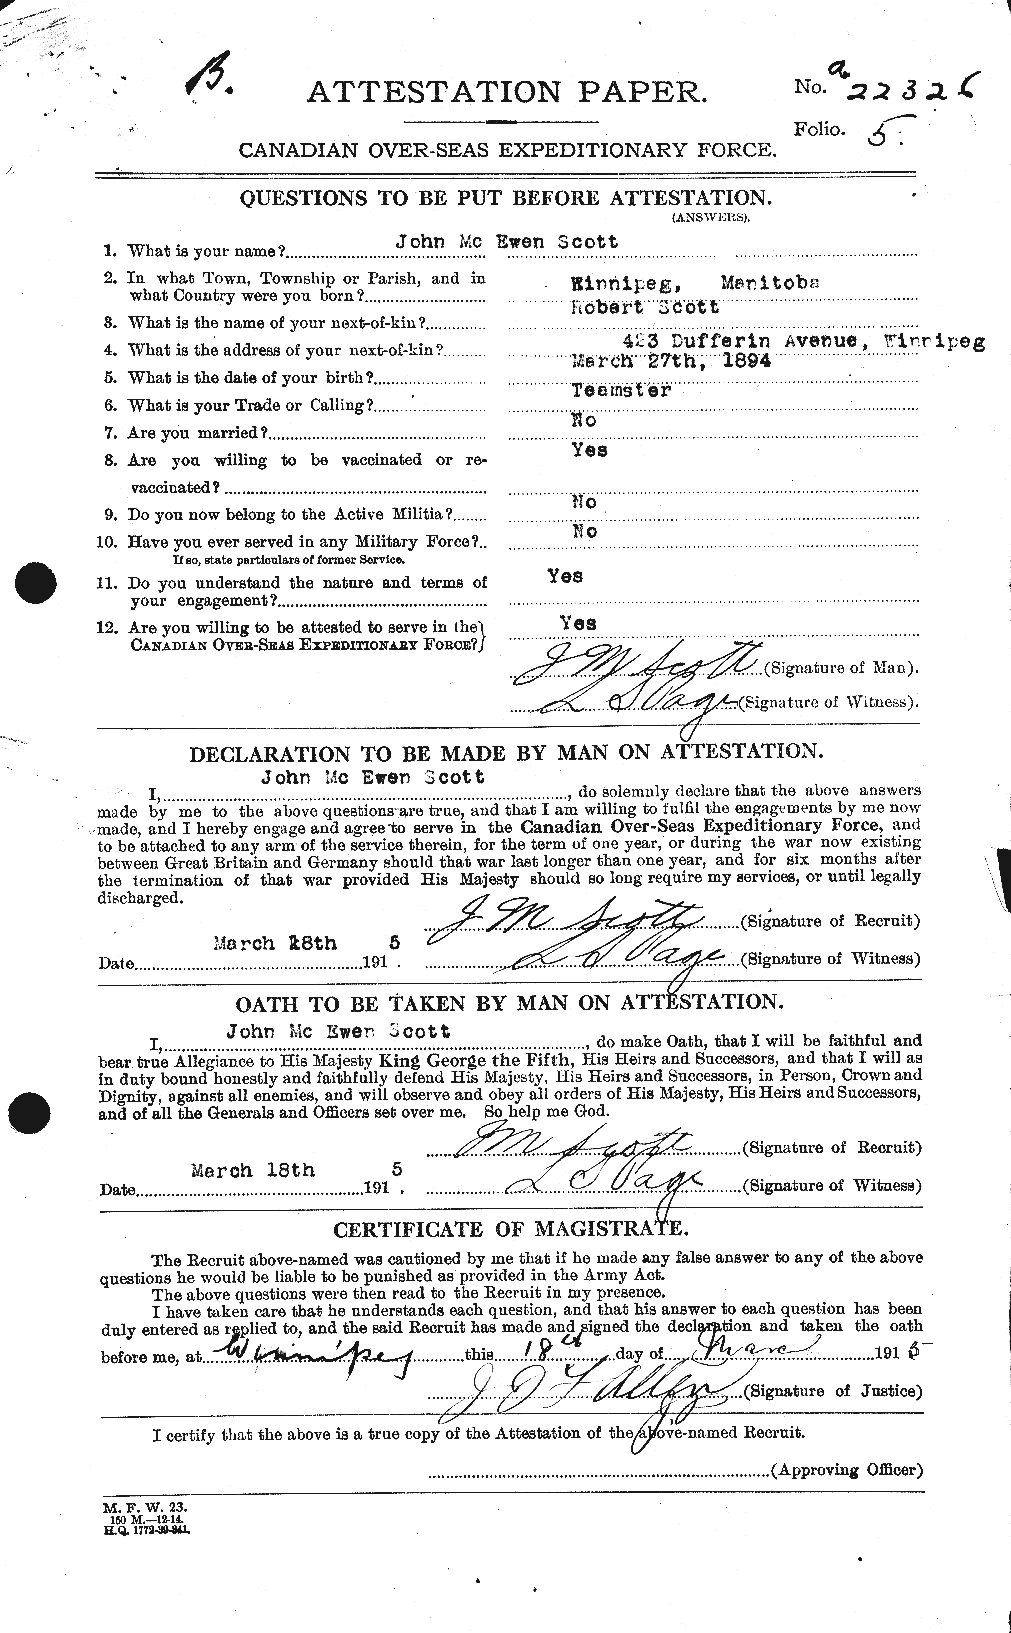 Personnel Records of the First World War - CEF 084445a